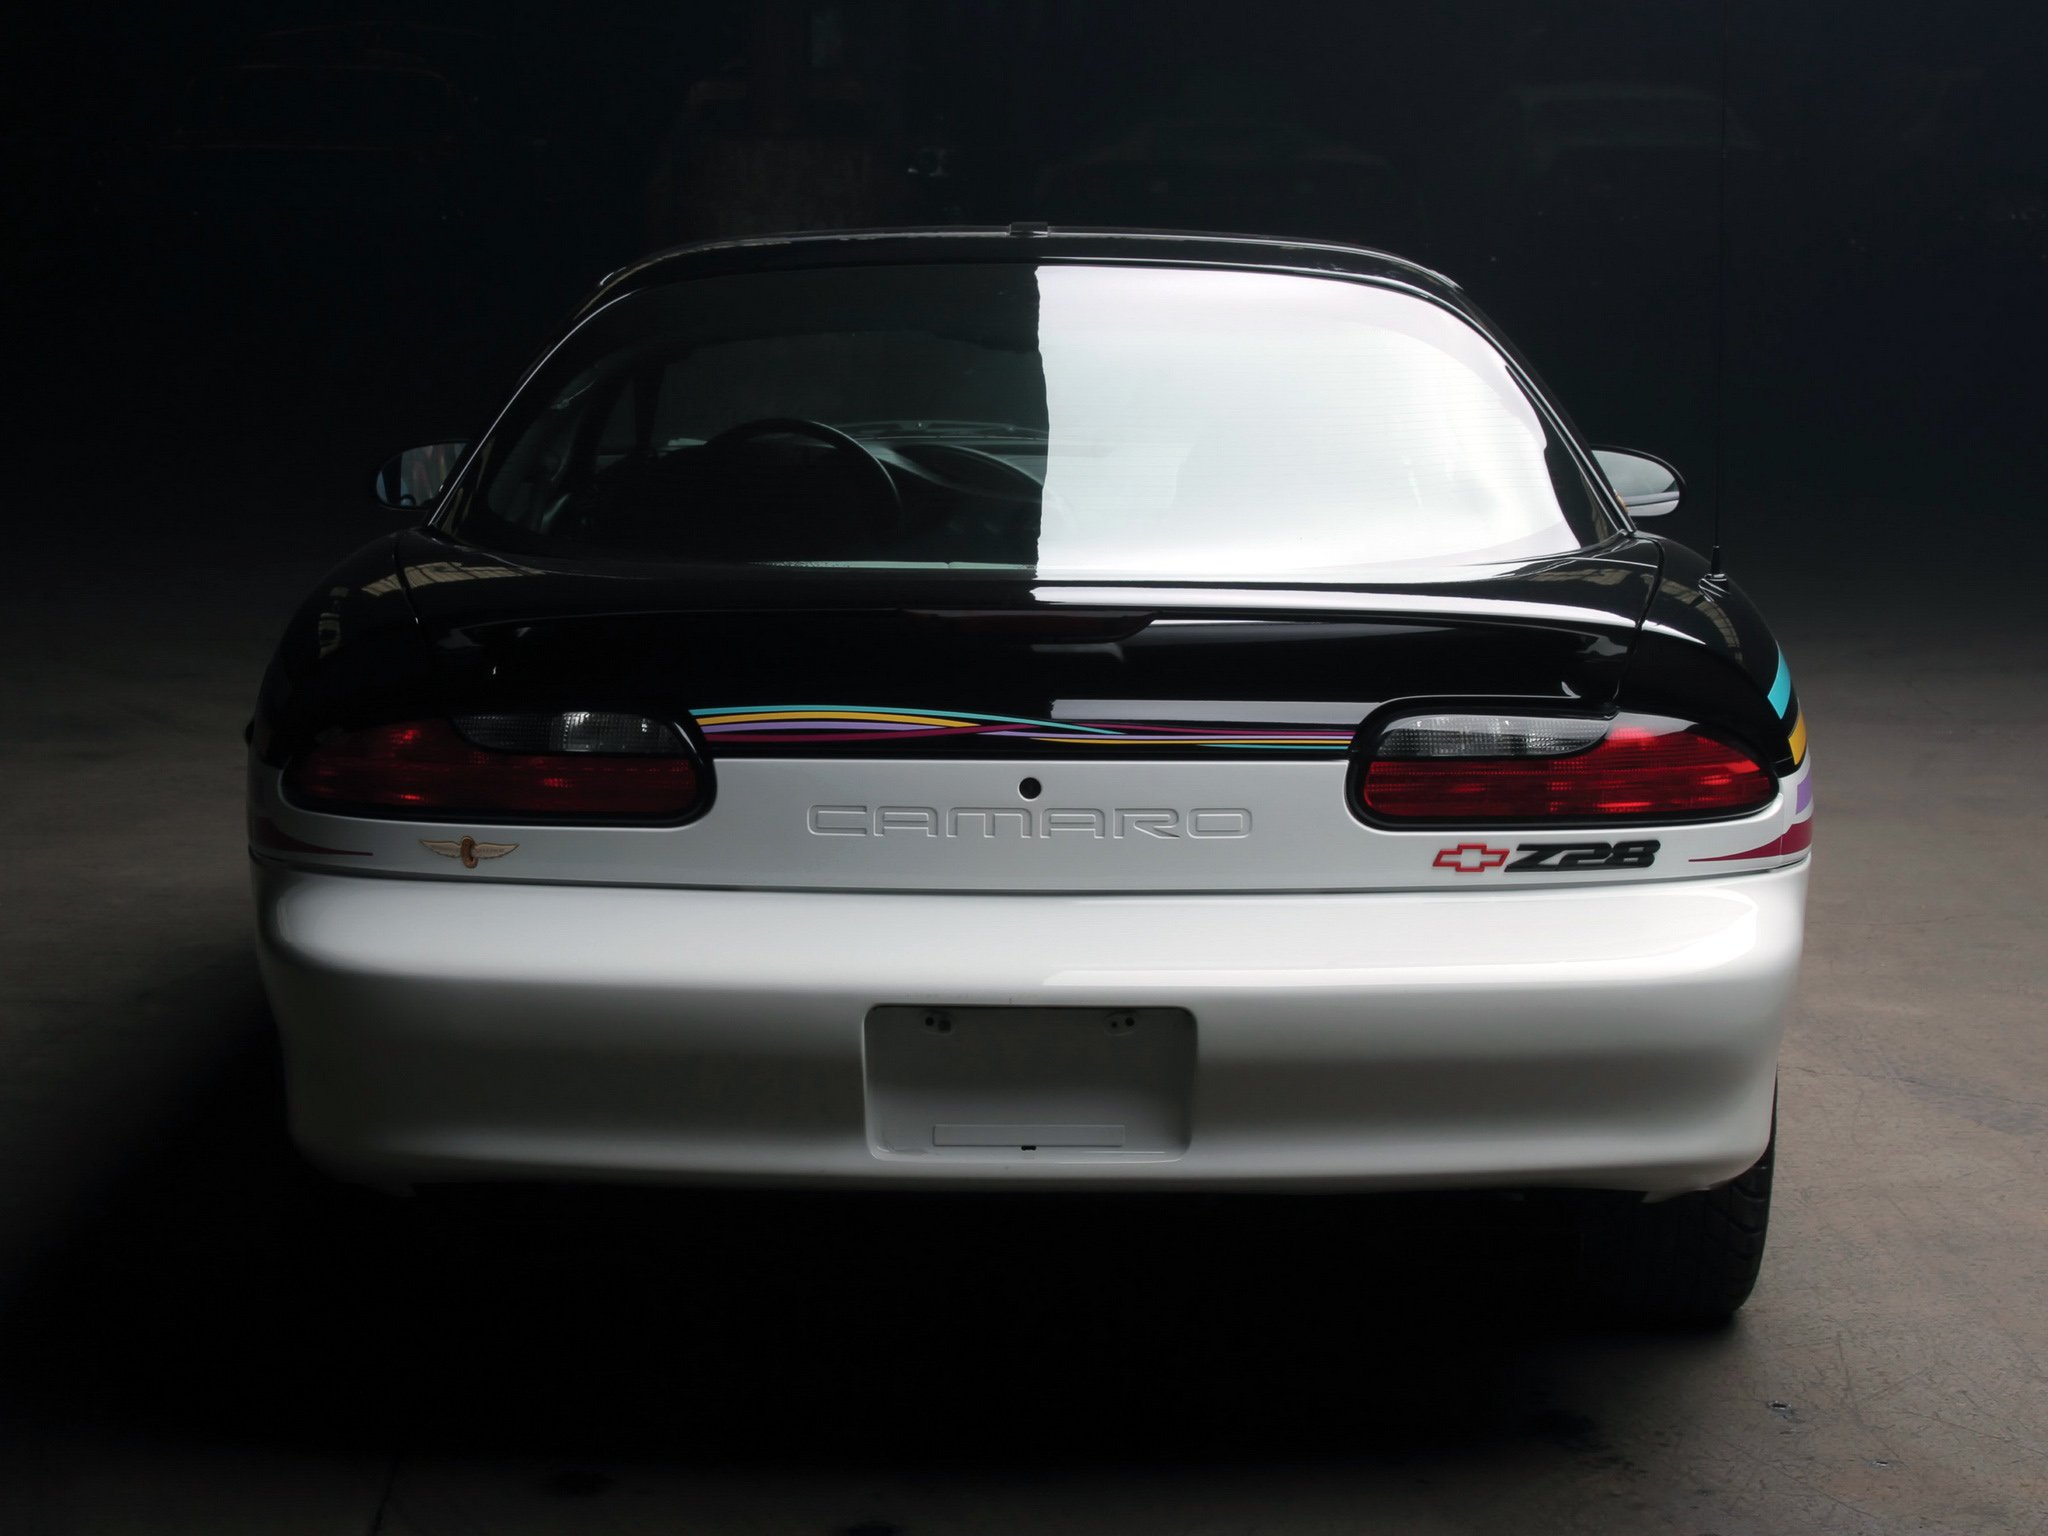 1993, Chevrolet, Camaro, Z28, Indy, 500, Pace, Muscle, Race, Racing Wallpaper